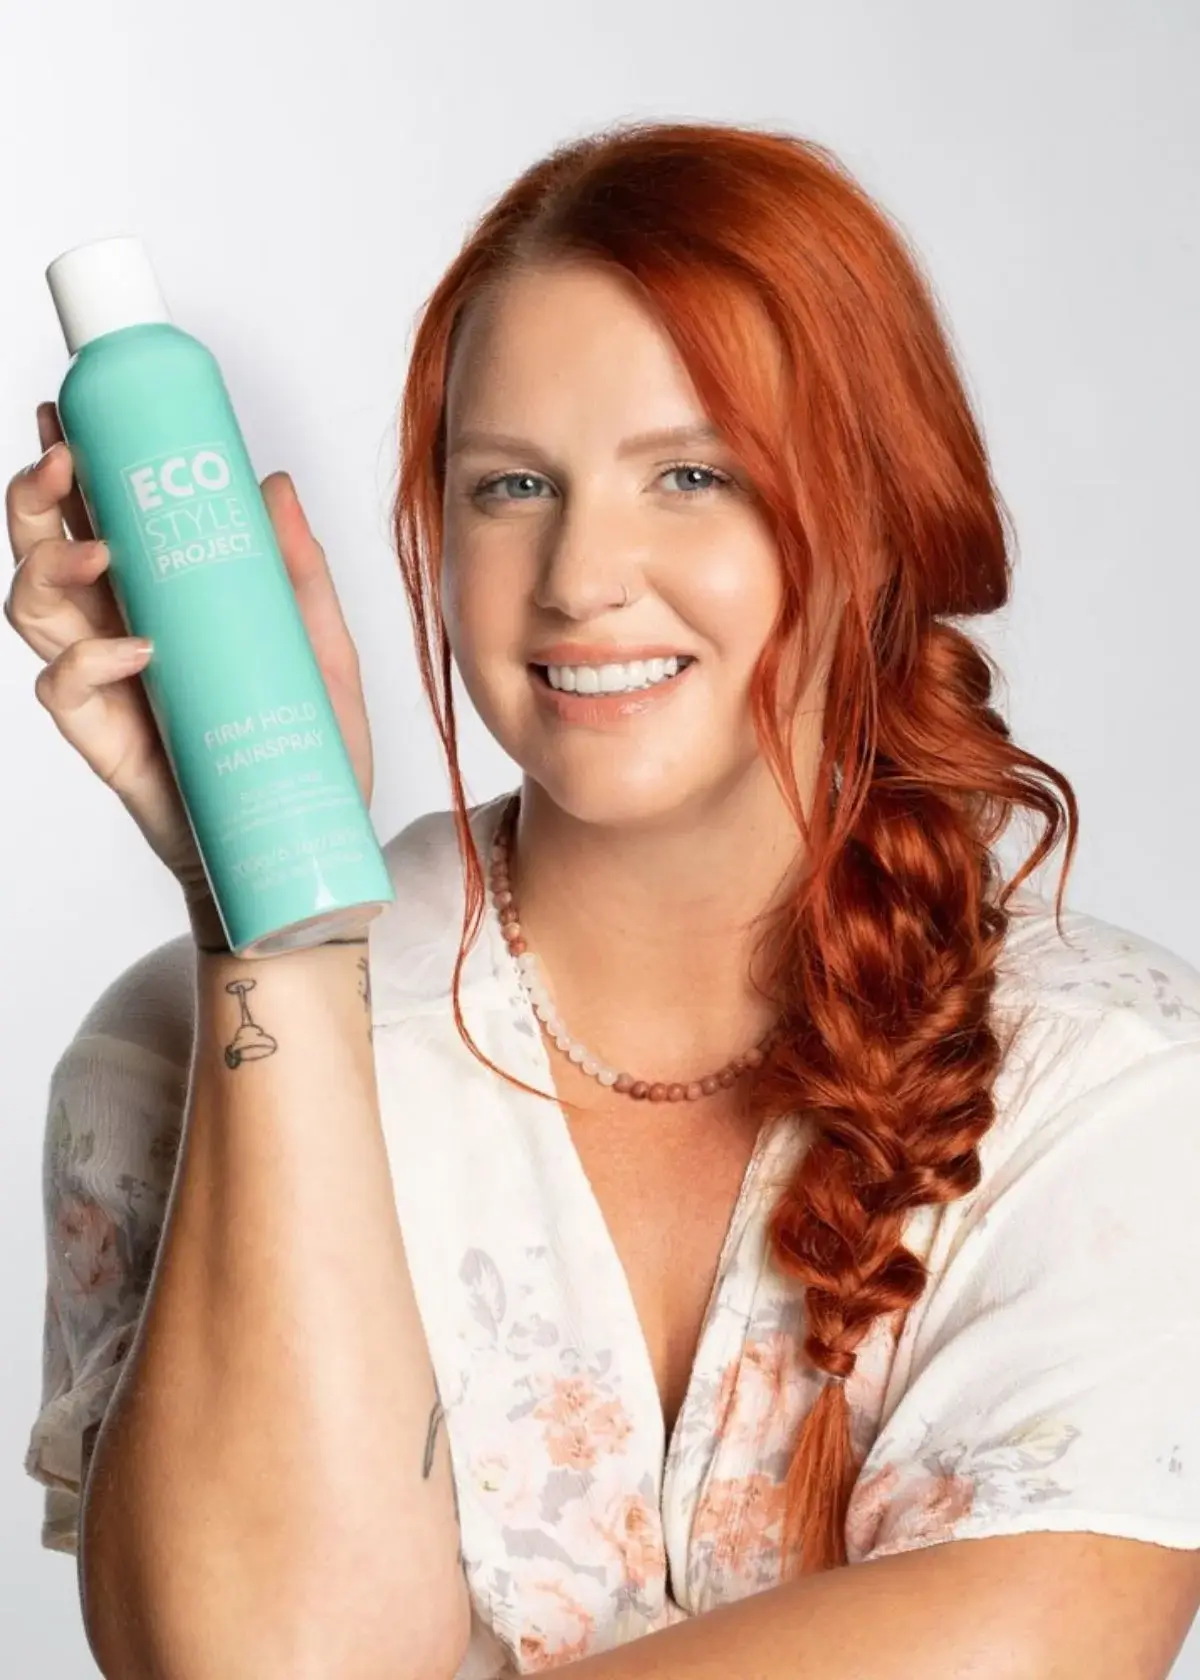 Is a heat protectant spray suitable for all hair types?